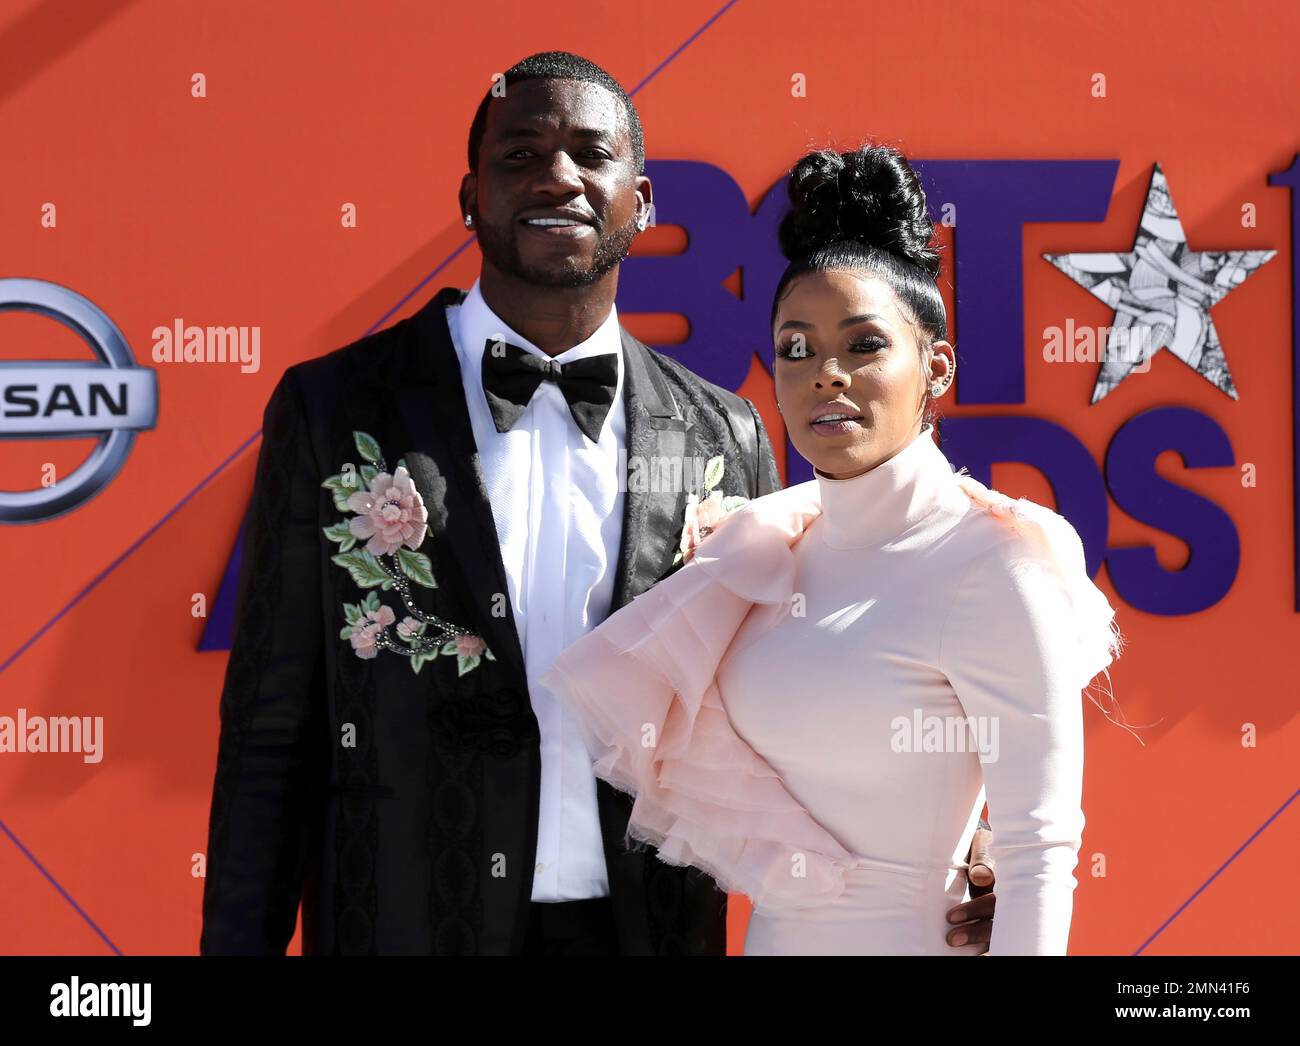 Rapper Gucci Mane, left, and his wife, Keyshia Ka'Oir, sit courtside during  the NBA All-Star Saturday Night festivities at Spectrum Center in  Charlotte, N.C., on Saturday, Feb. 16, 2019. (Photo by Jeff